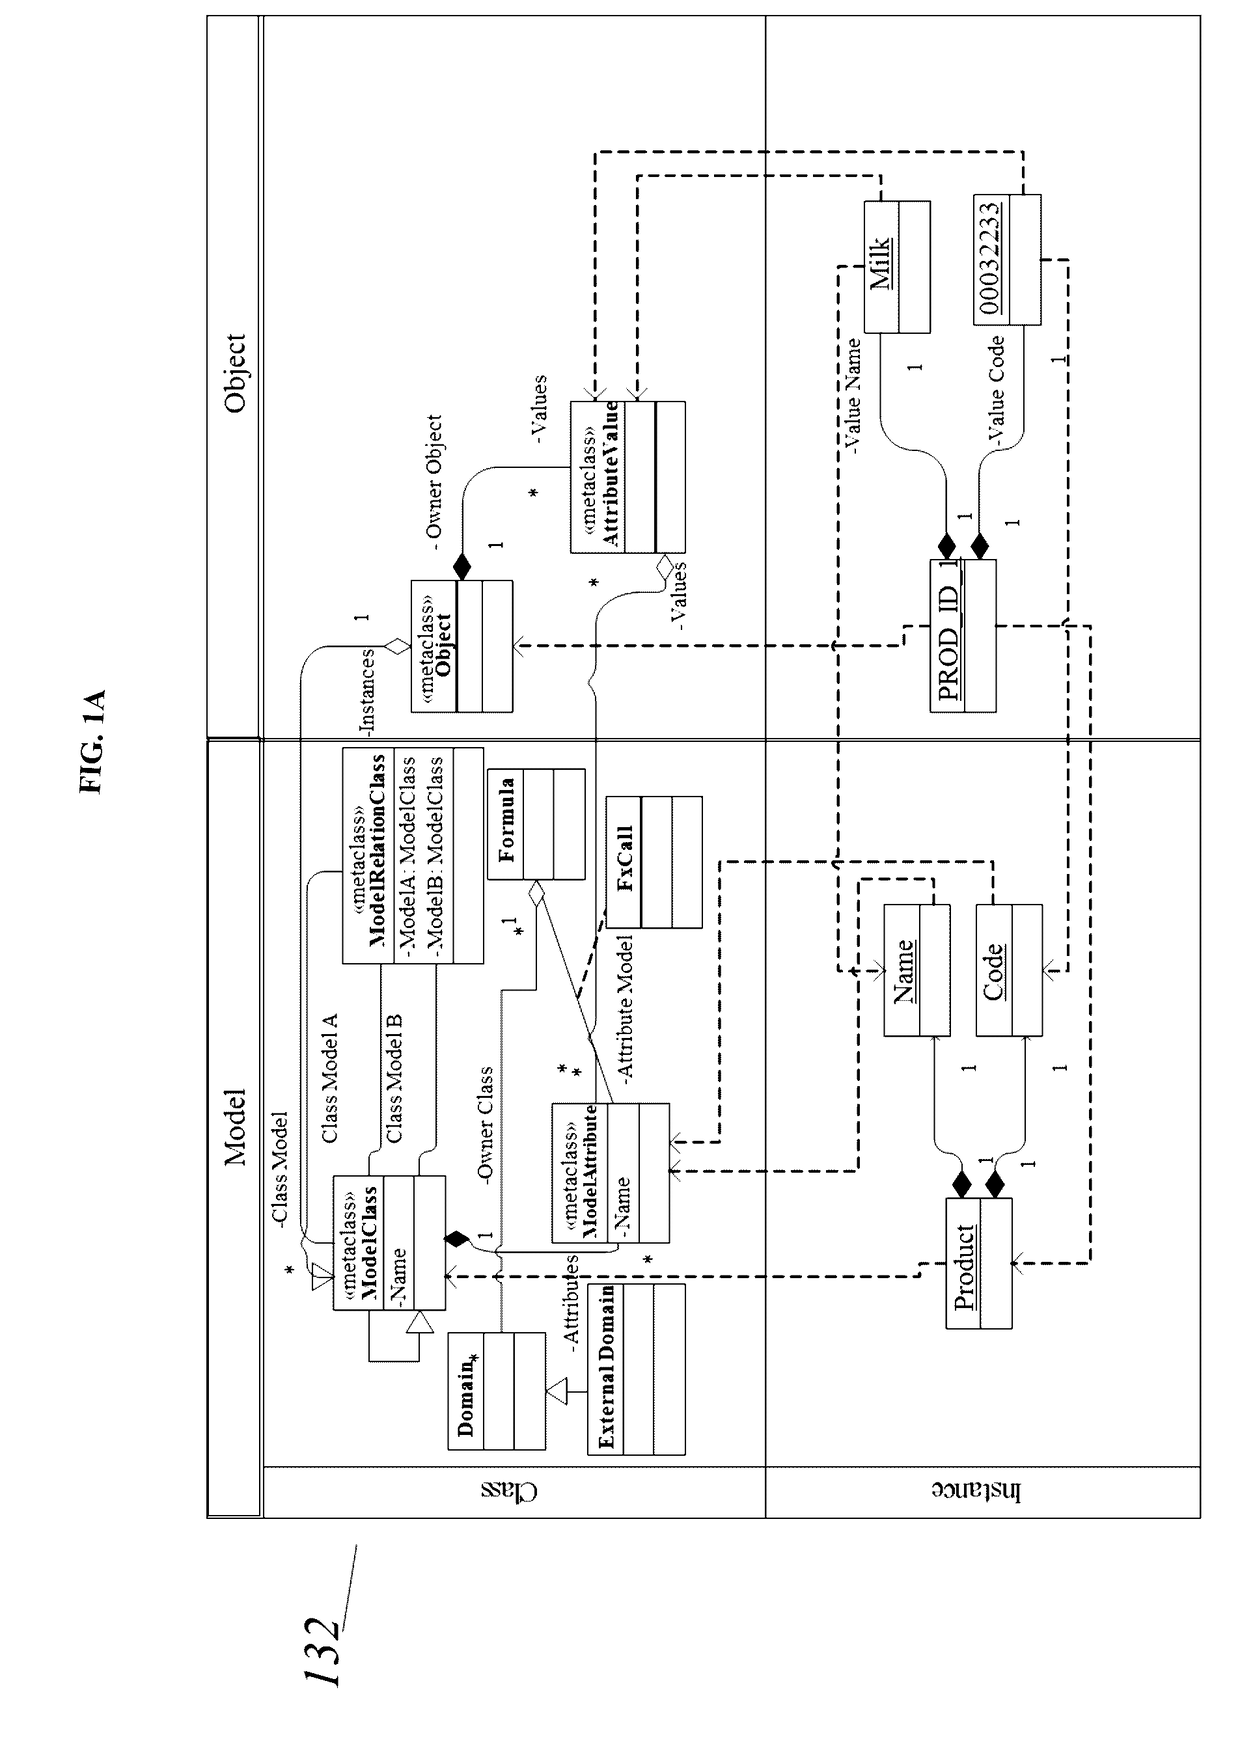 Computer-applied method for displaying software-type applications based on design specifications